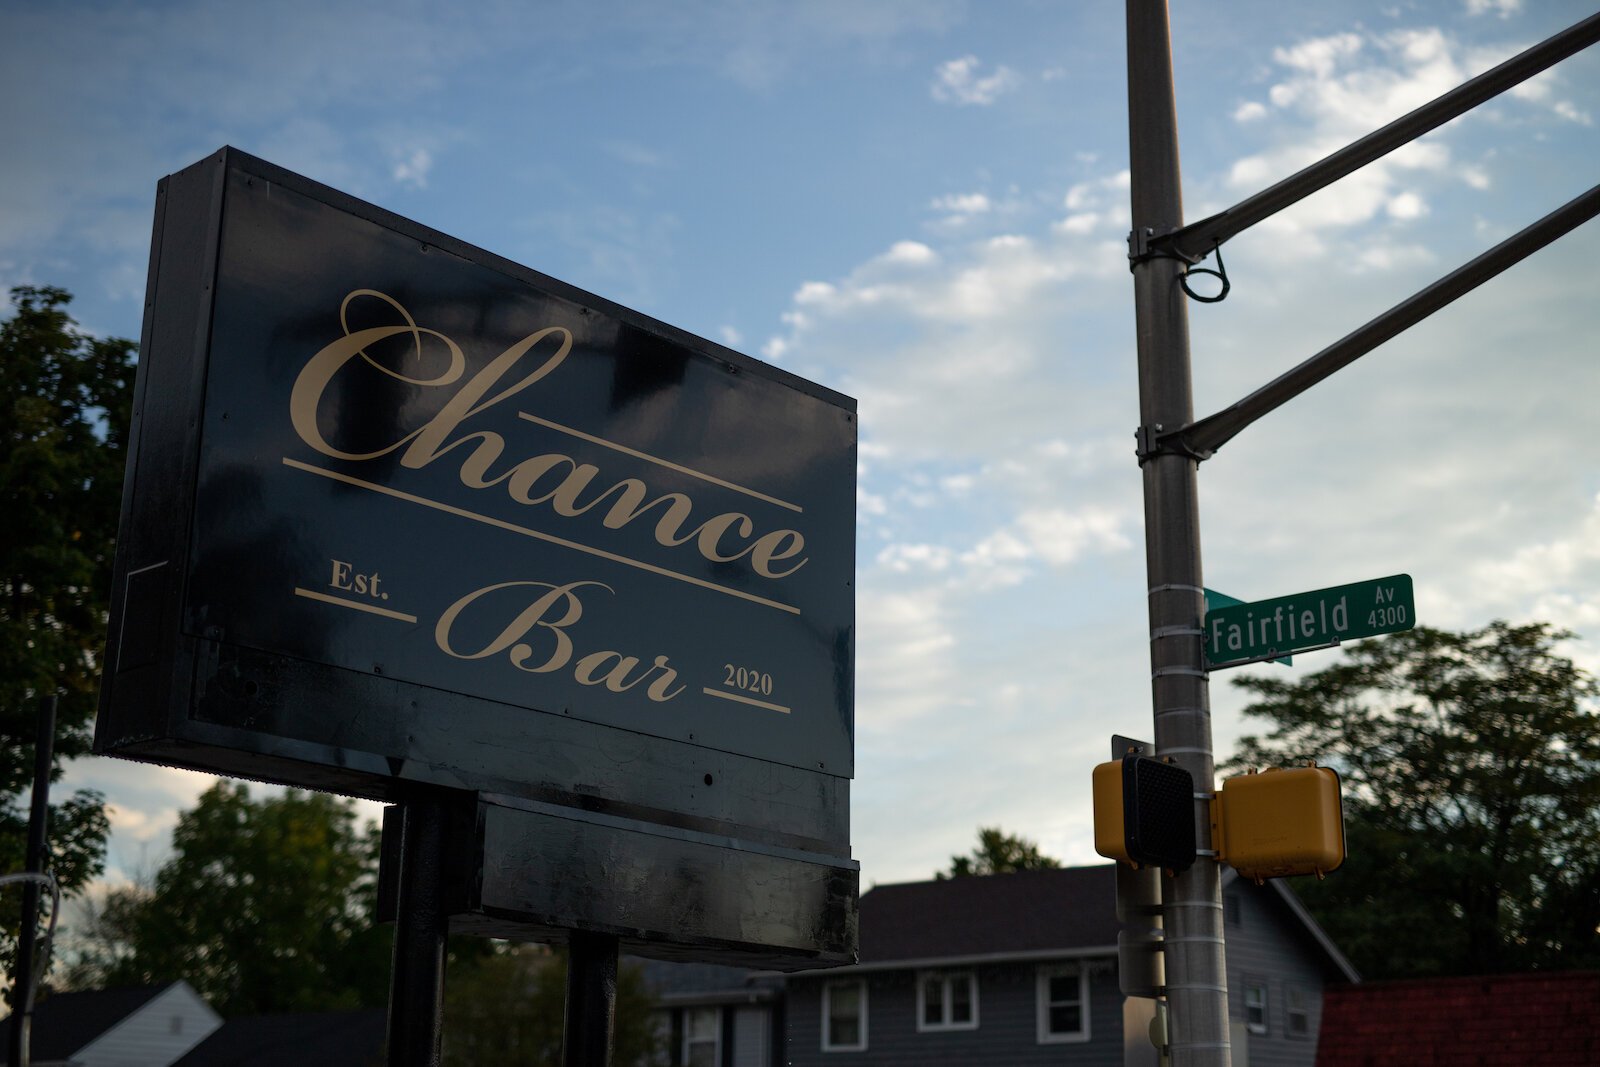 Chance Bar is located at 4301 Fairfield Ave.